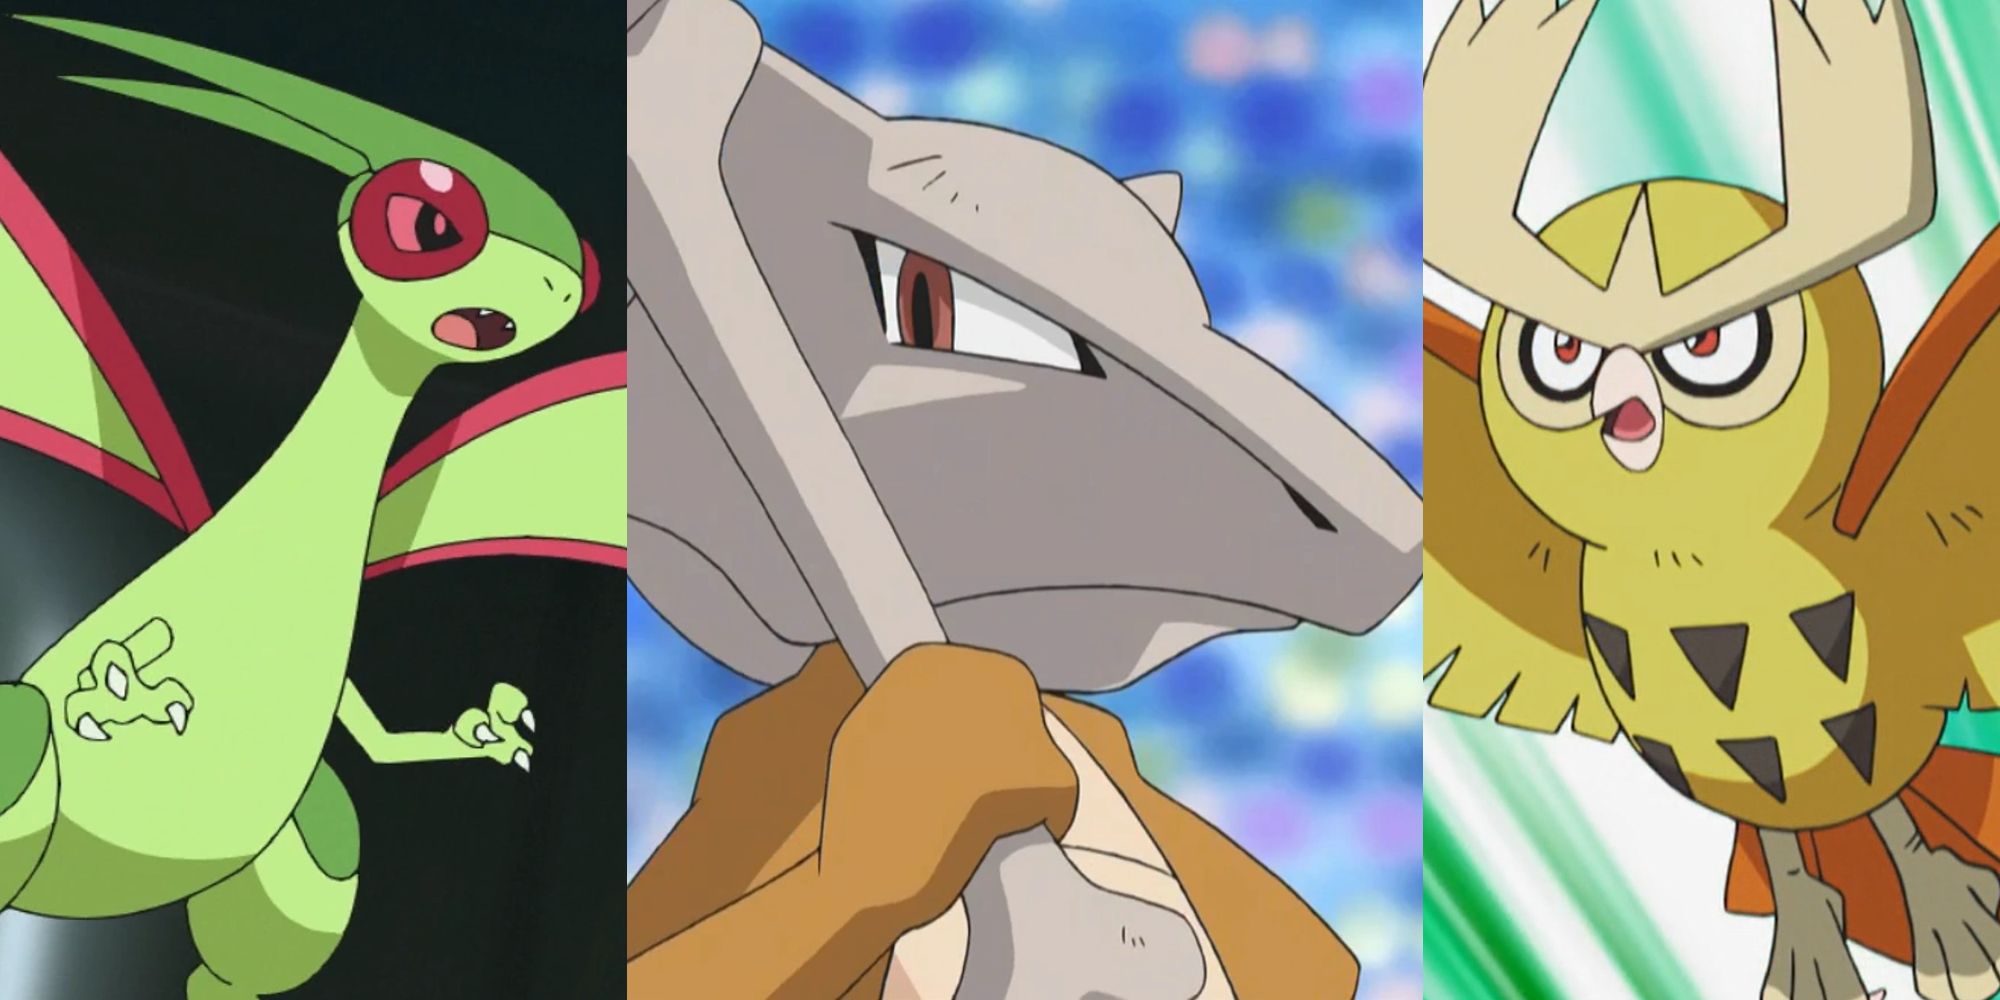 Flygon in the air; Marowak holding a bone; Shiny Noctowl flying